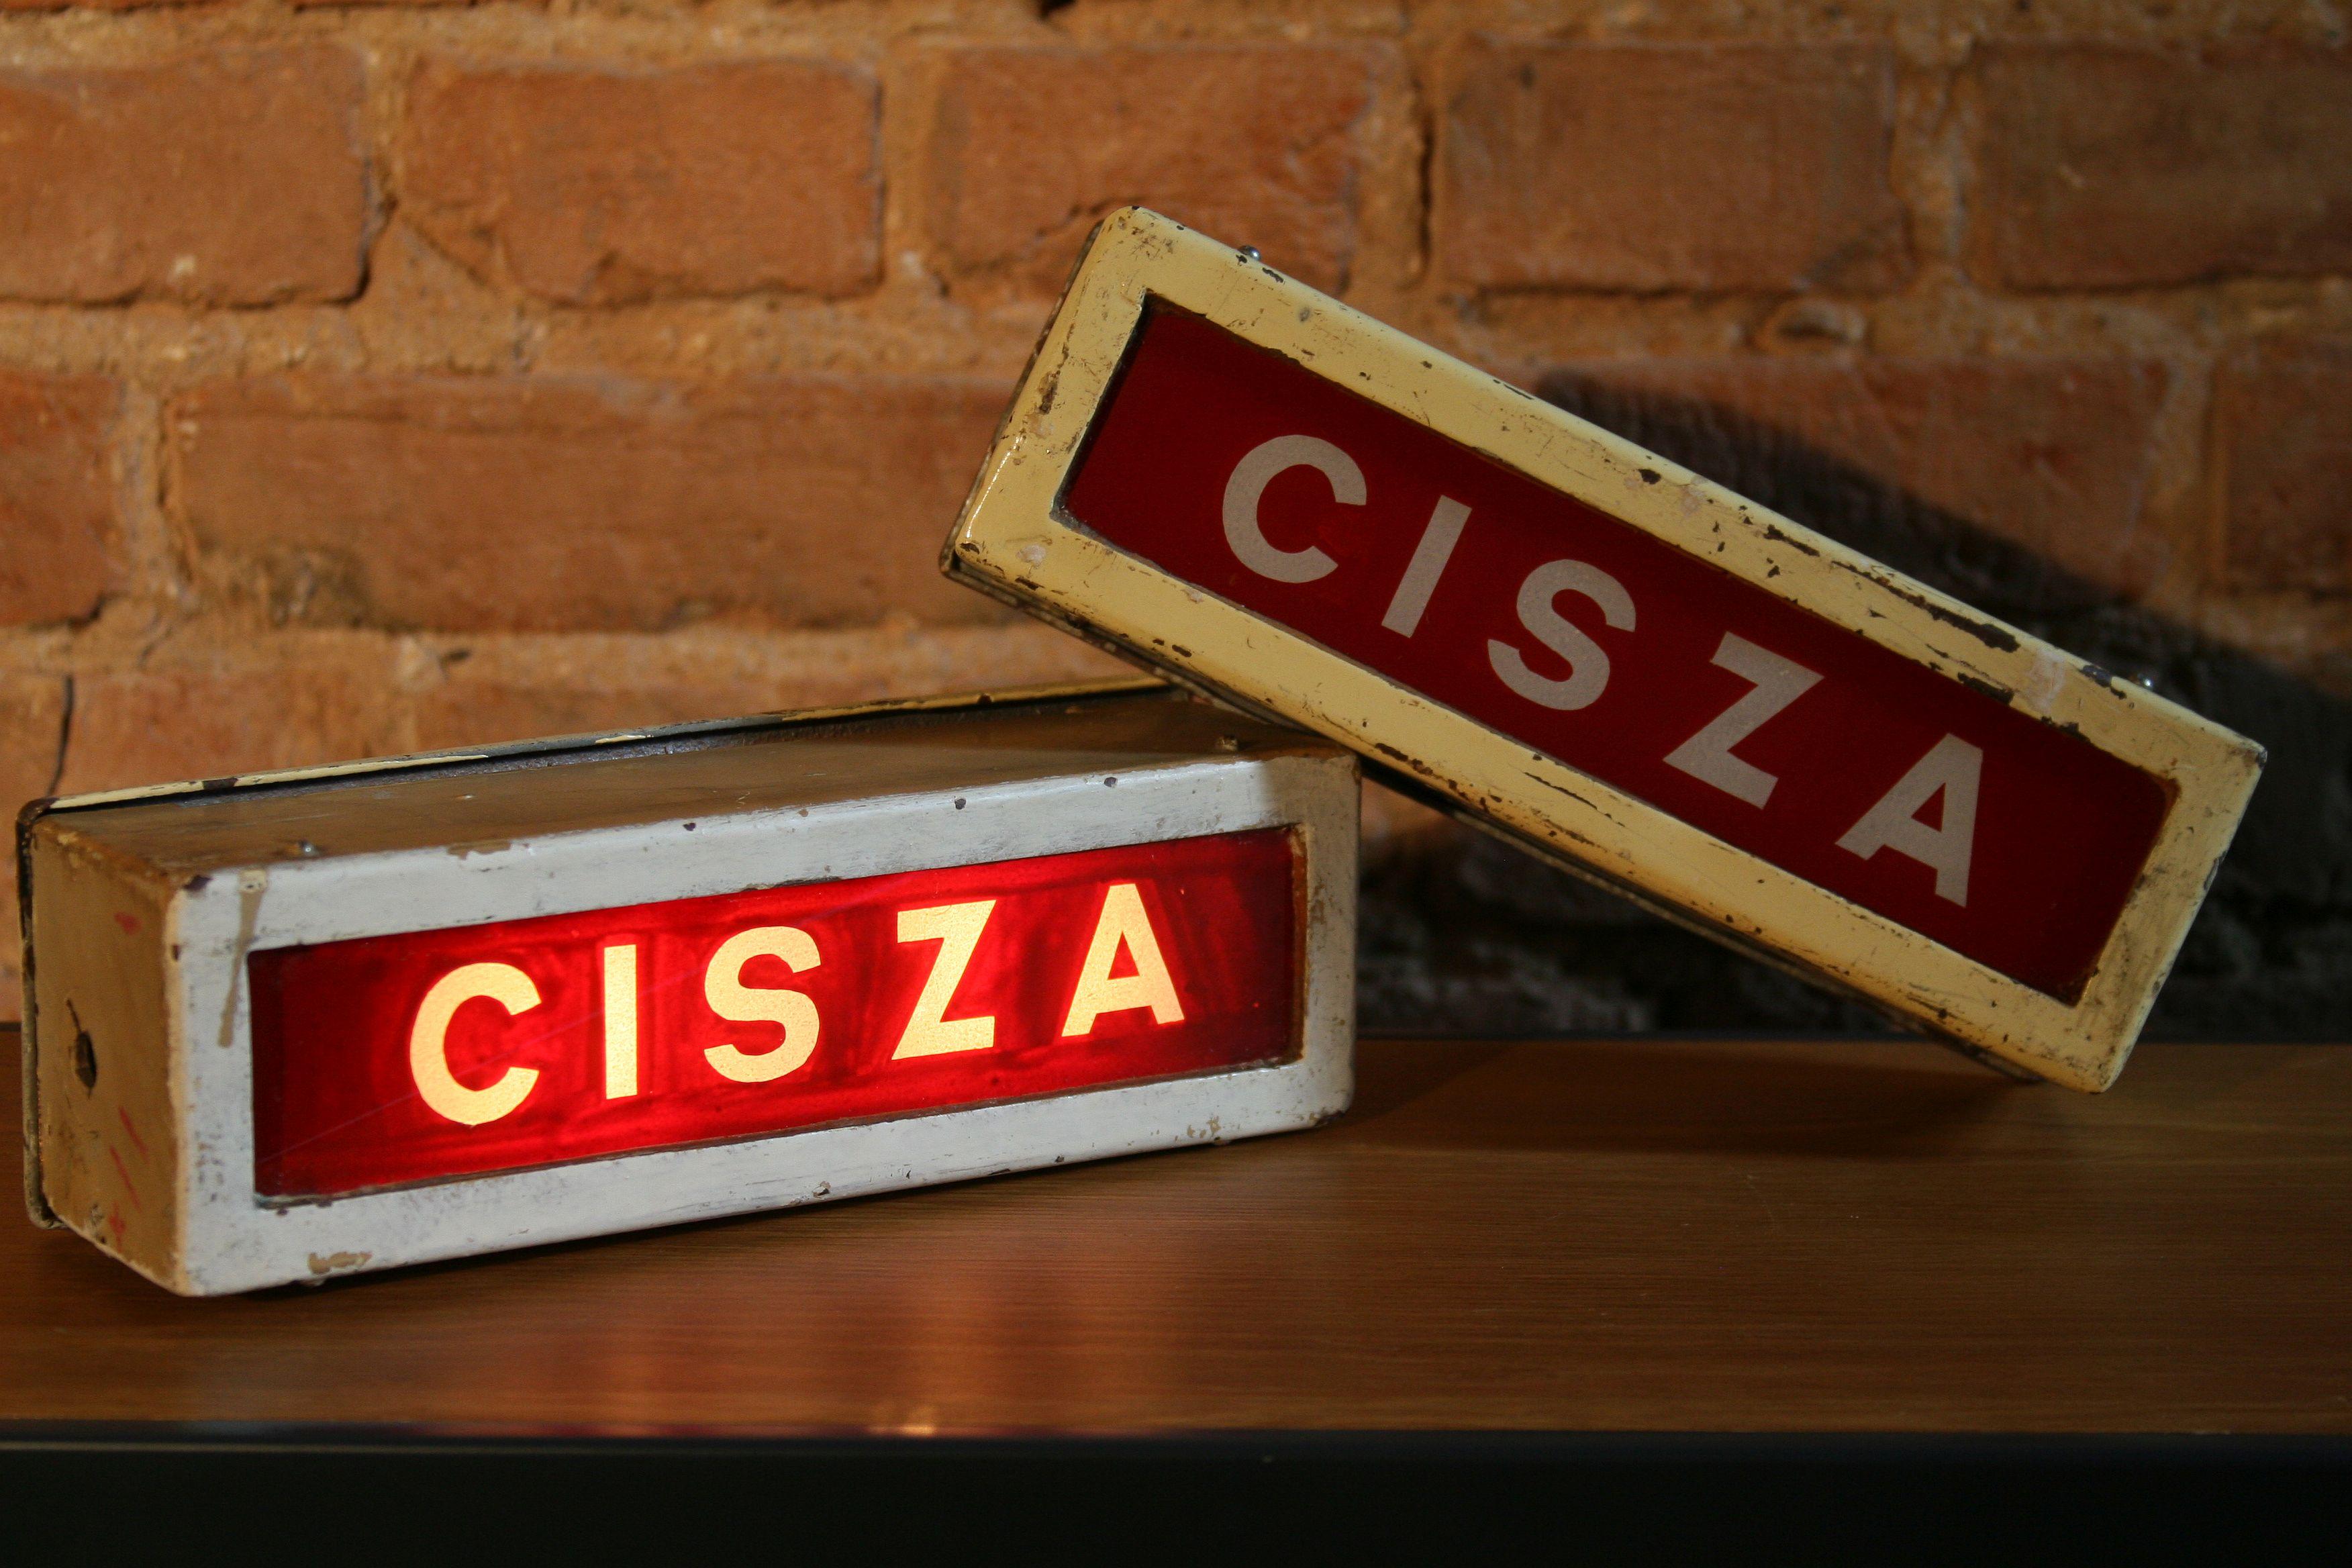 Industrial 1950s Illuminated Theater Sign “Cisza”, Meaning “Silence”